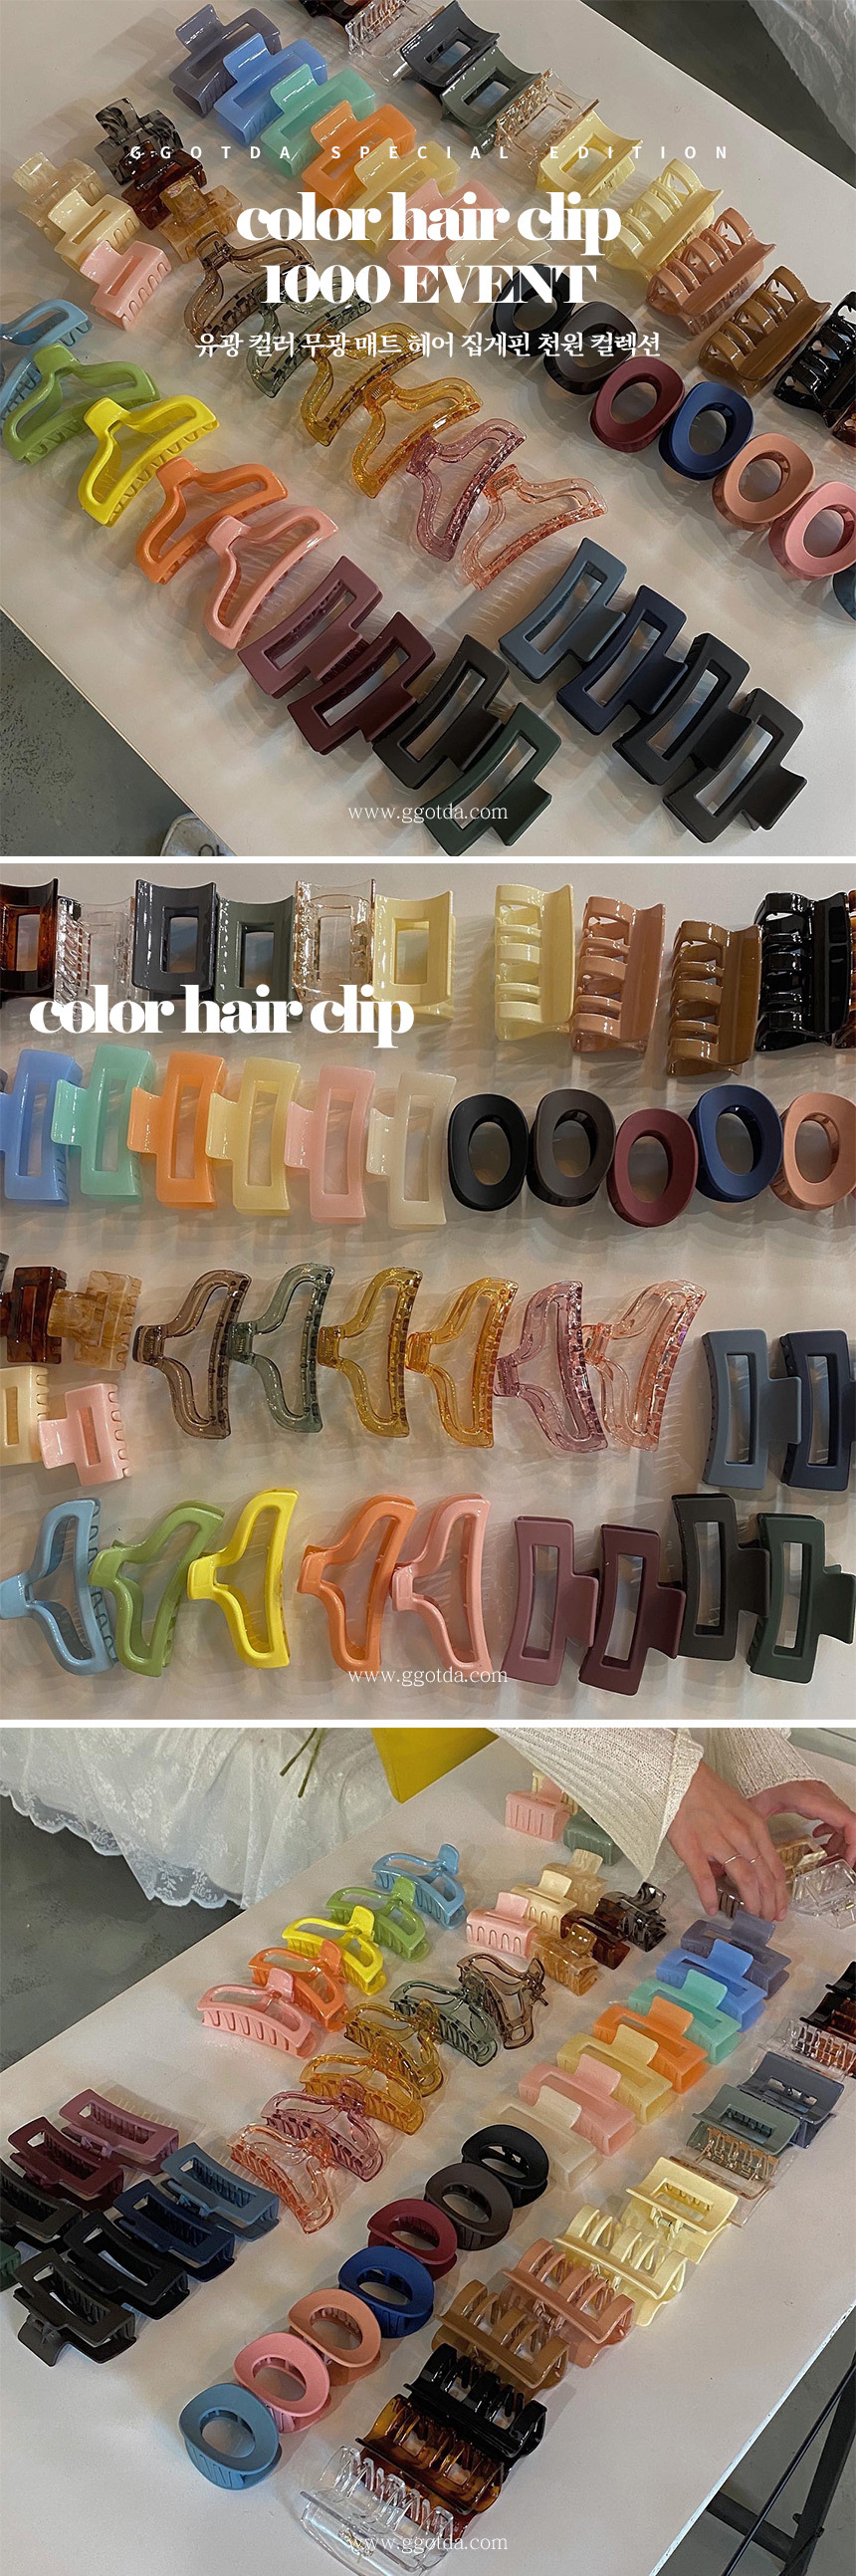 colorhairclip_intro.jpg